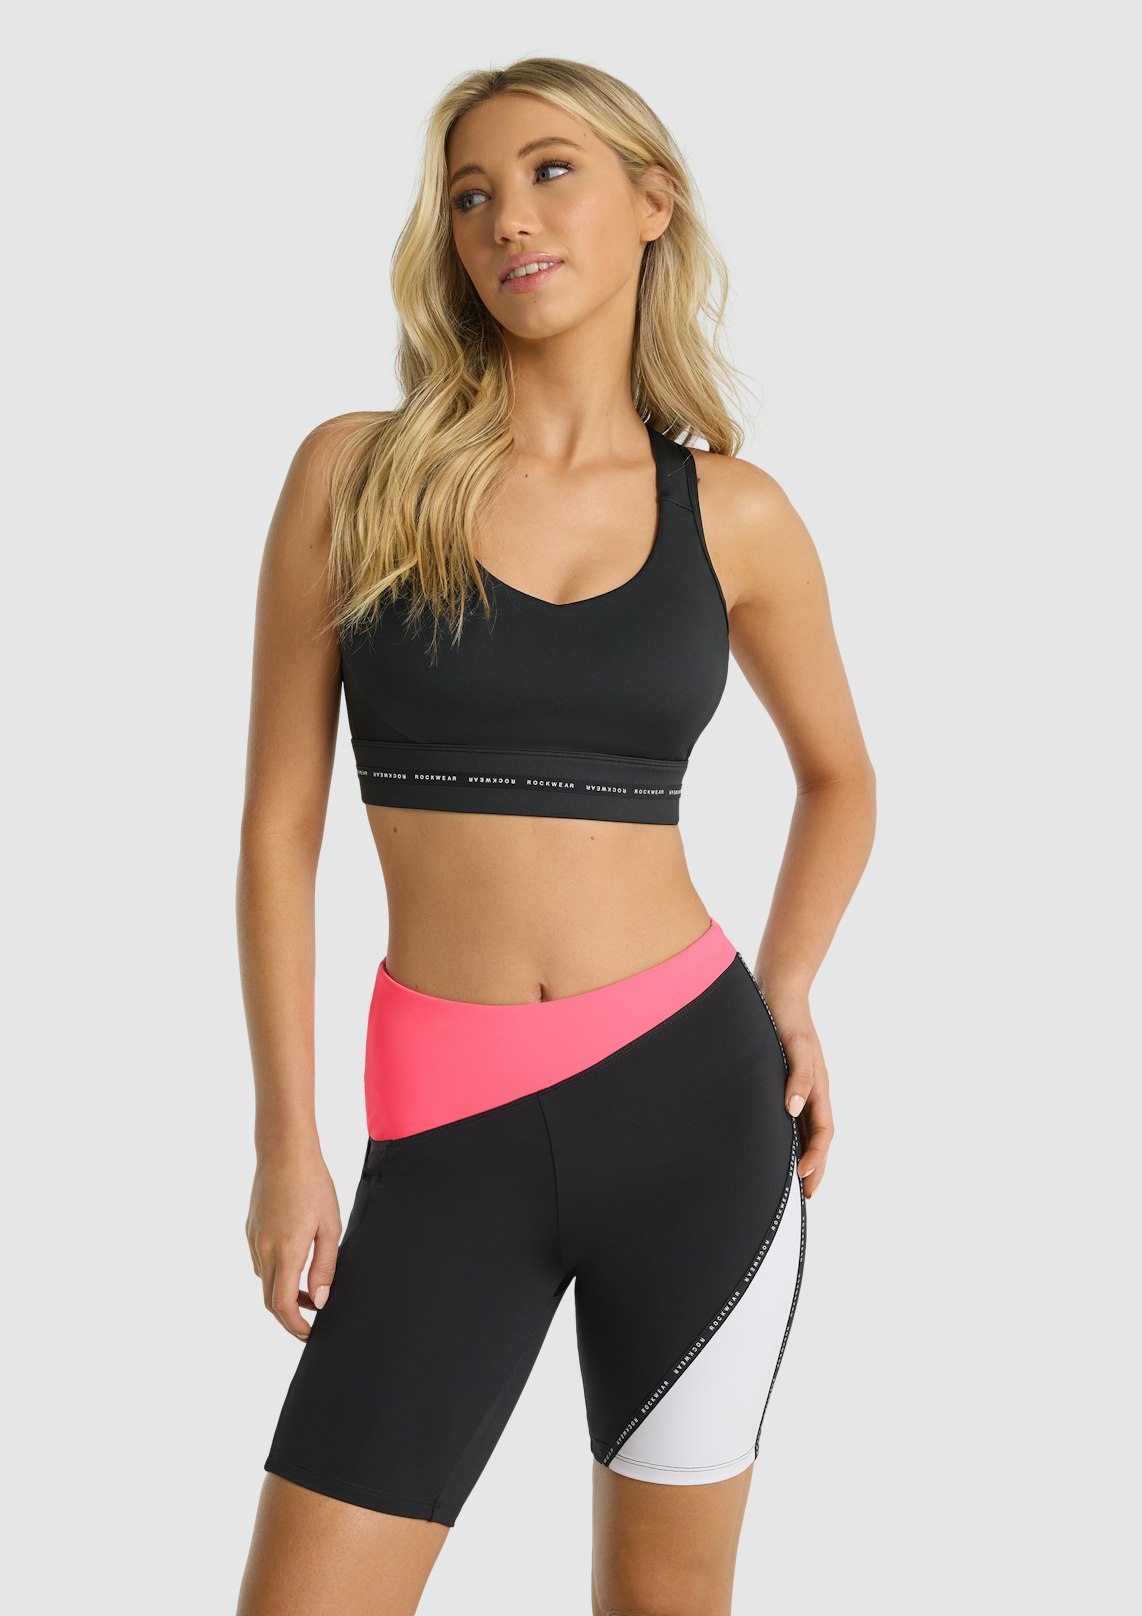 High Impact Sports Bra available in all Sizes and Colors